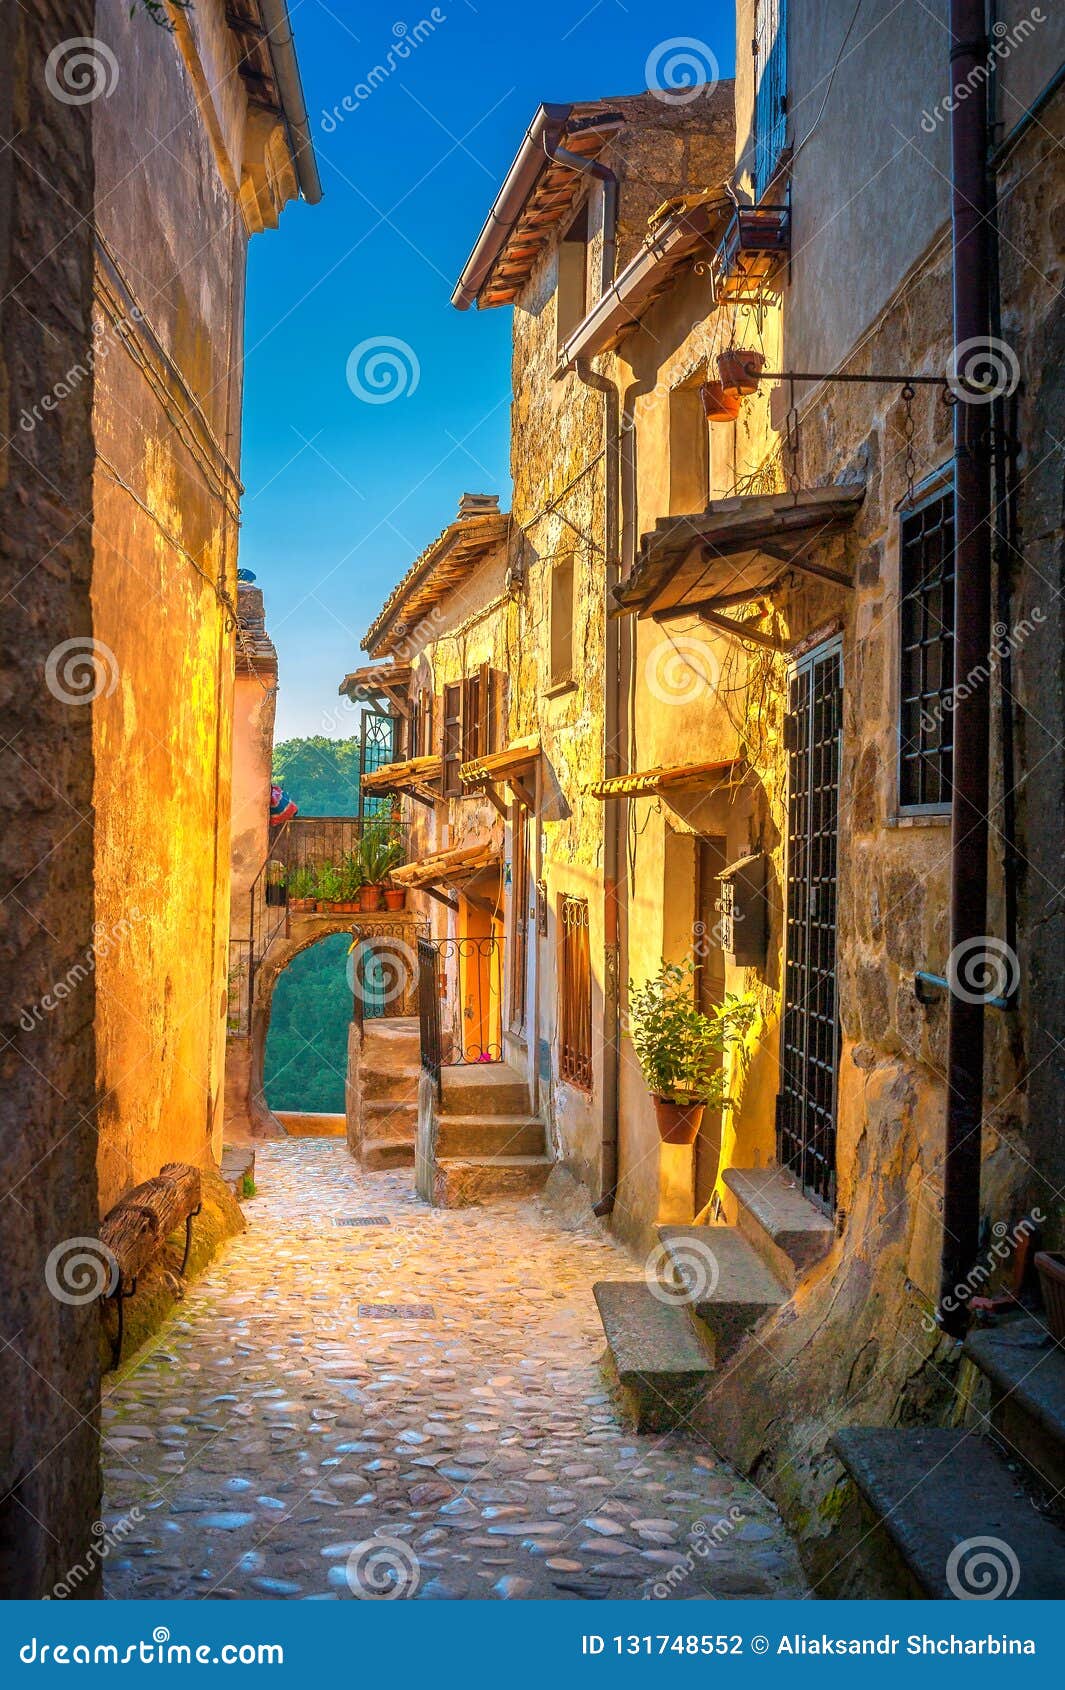 A Street in a Beautiful Small Medieval Village in Tuscany at Sunset